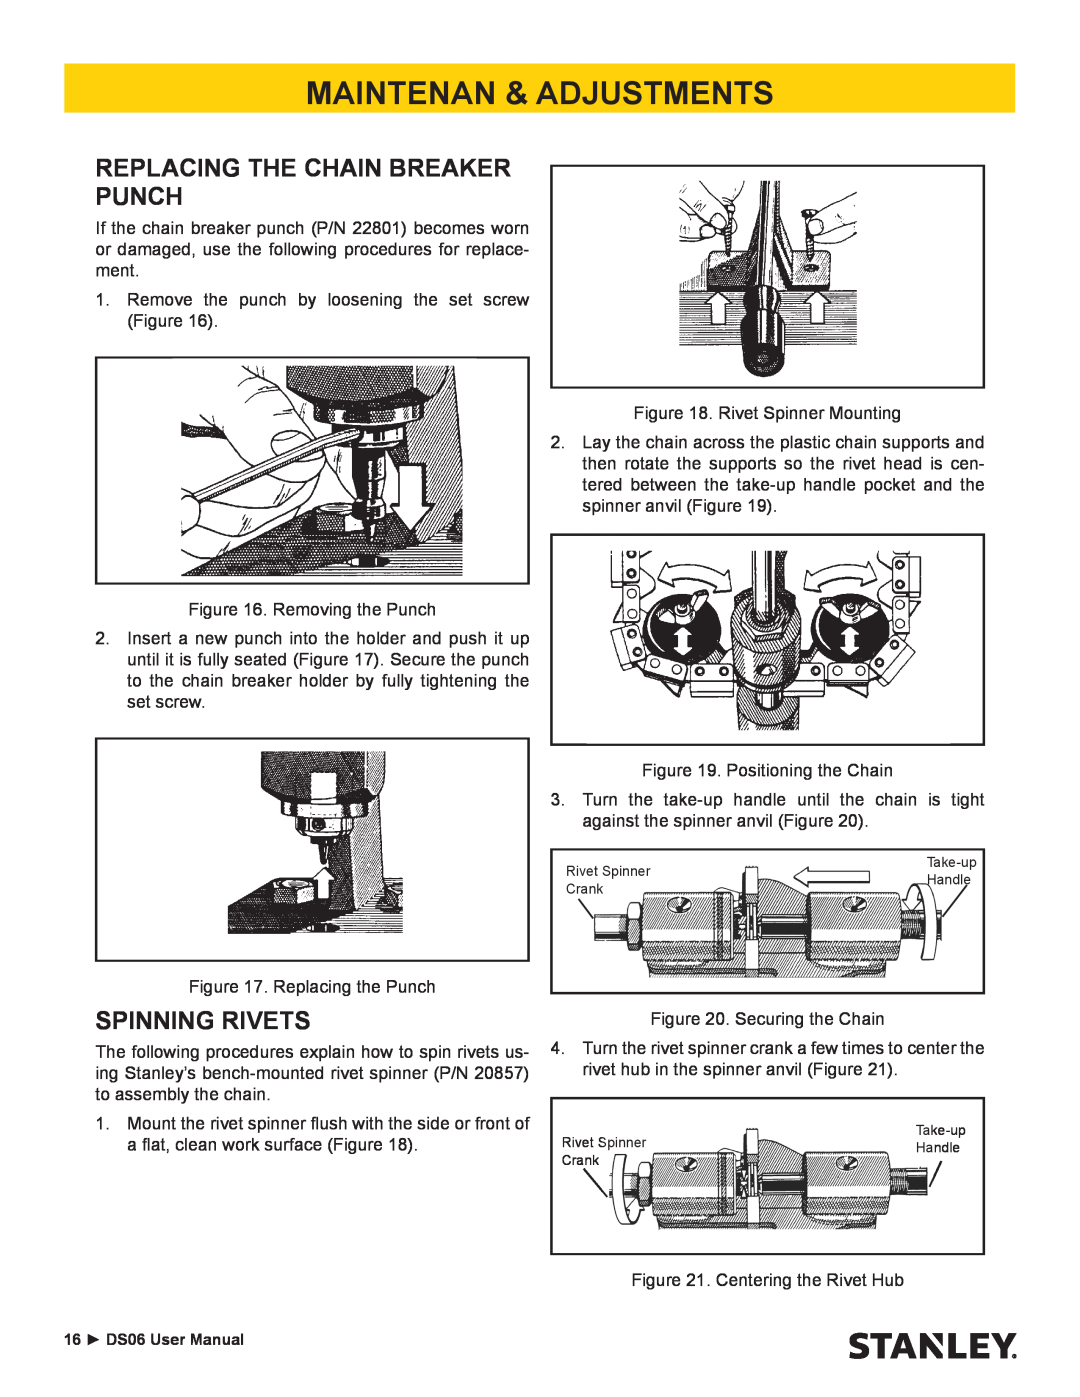 Stanley Black & Decker DS06 user manual Replacing The Chain Breaker Punch, Spinning Rivets, Maintenan & Adjustments 